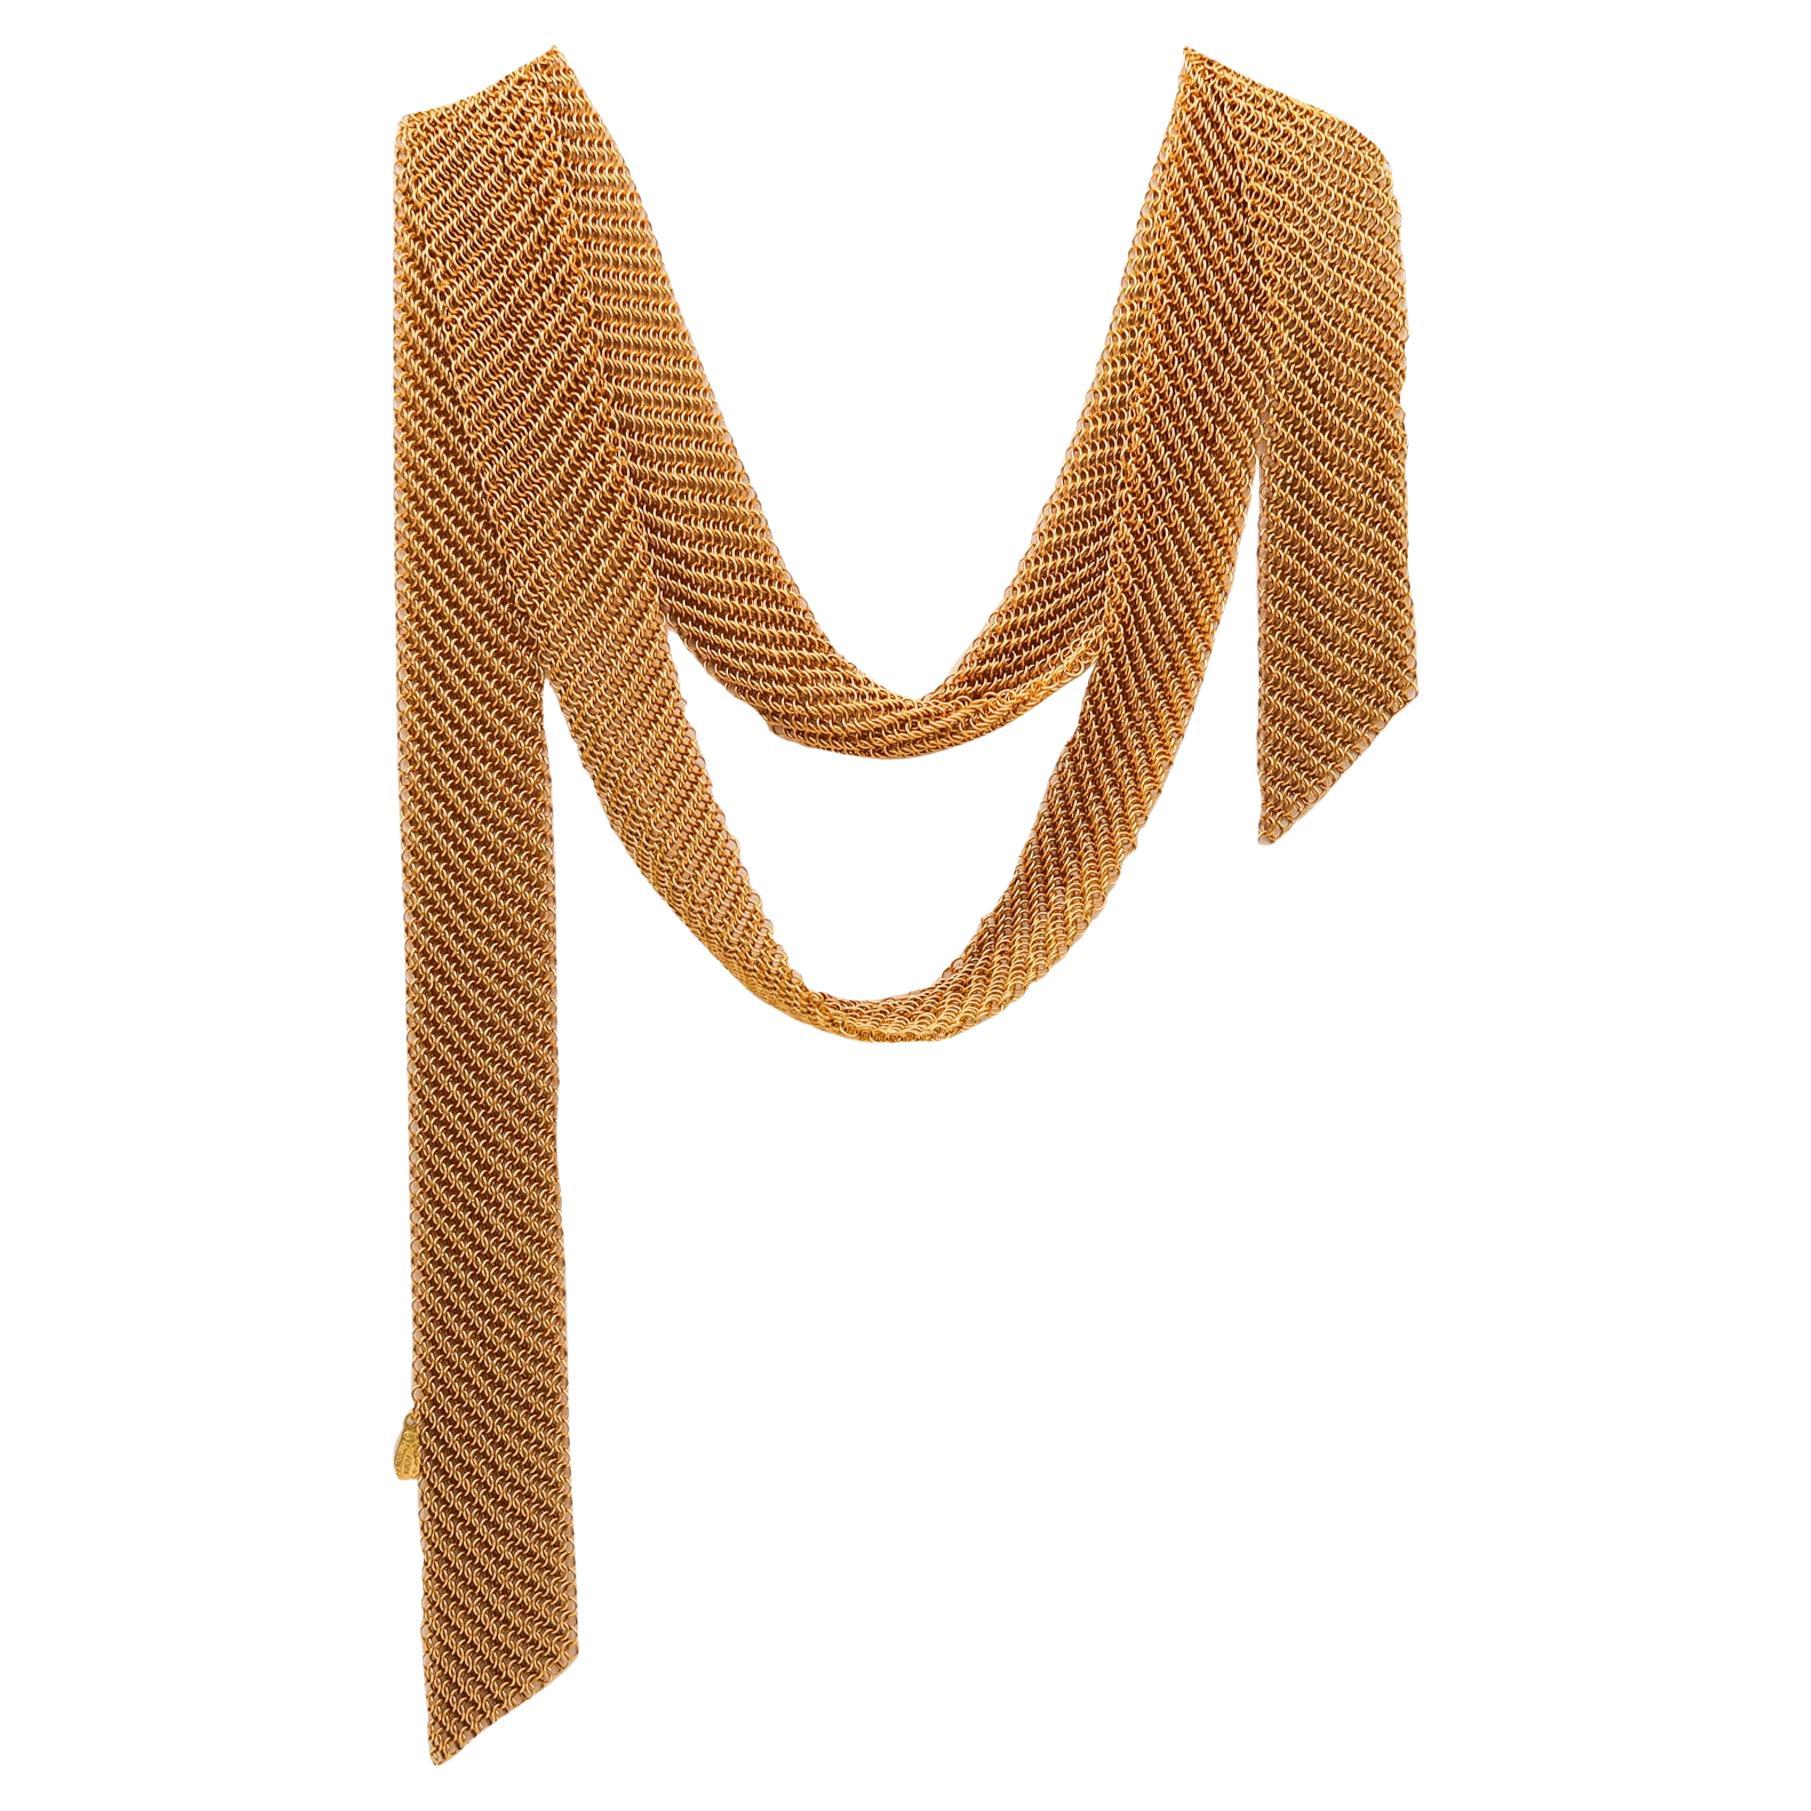 Tiffany & Co 1982 Elsa Peretti Mesh Scarf Draped Necklace in 18Kt Yellow Gold For Sale